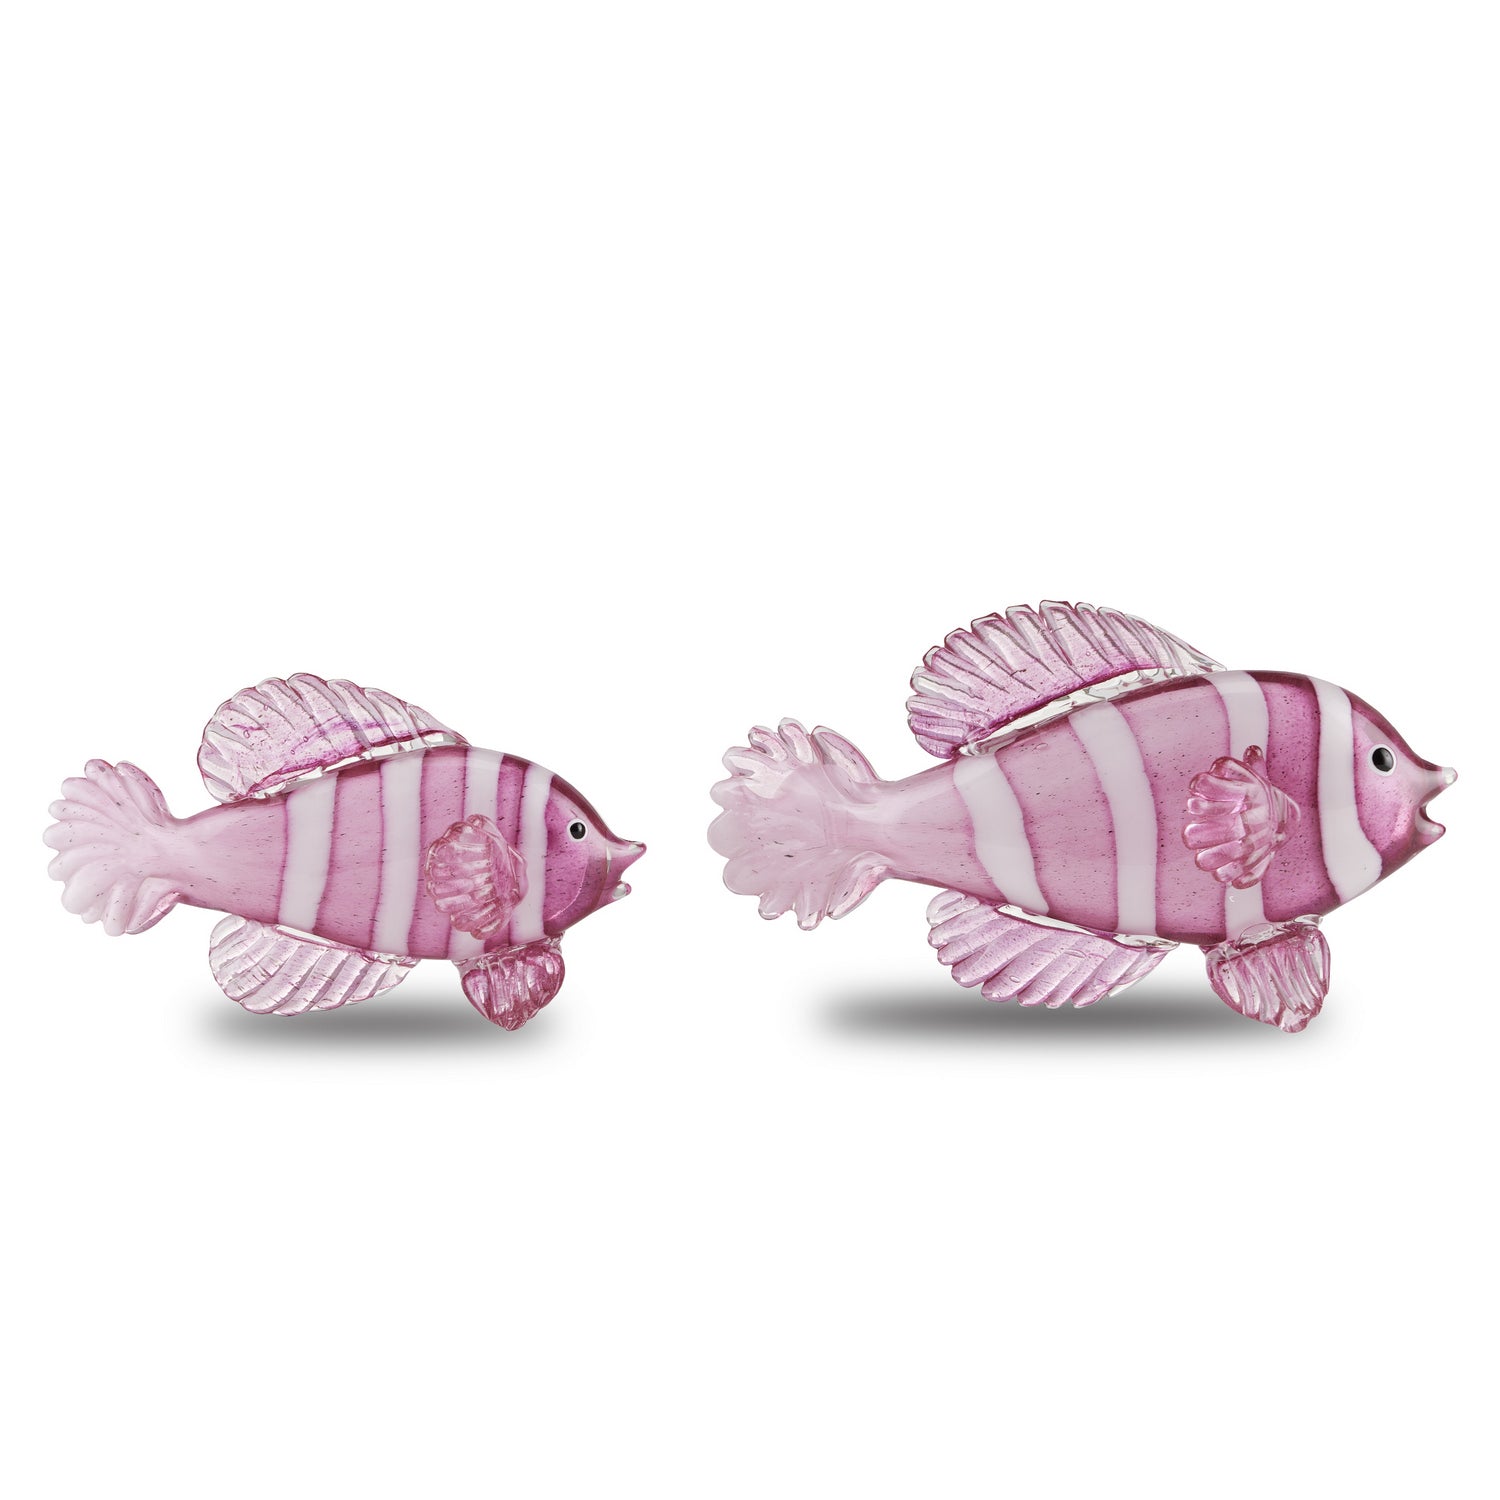 Fish Set of 2 from the Rialto collection in Pink/White finish